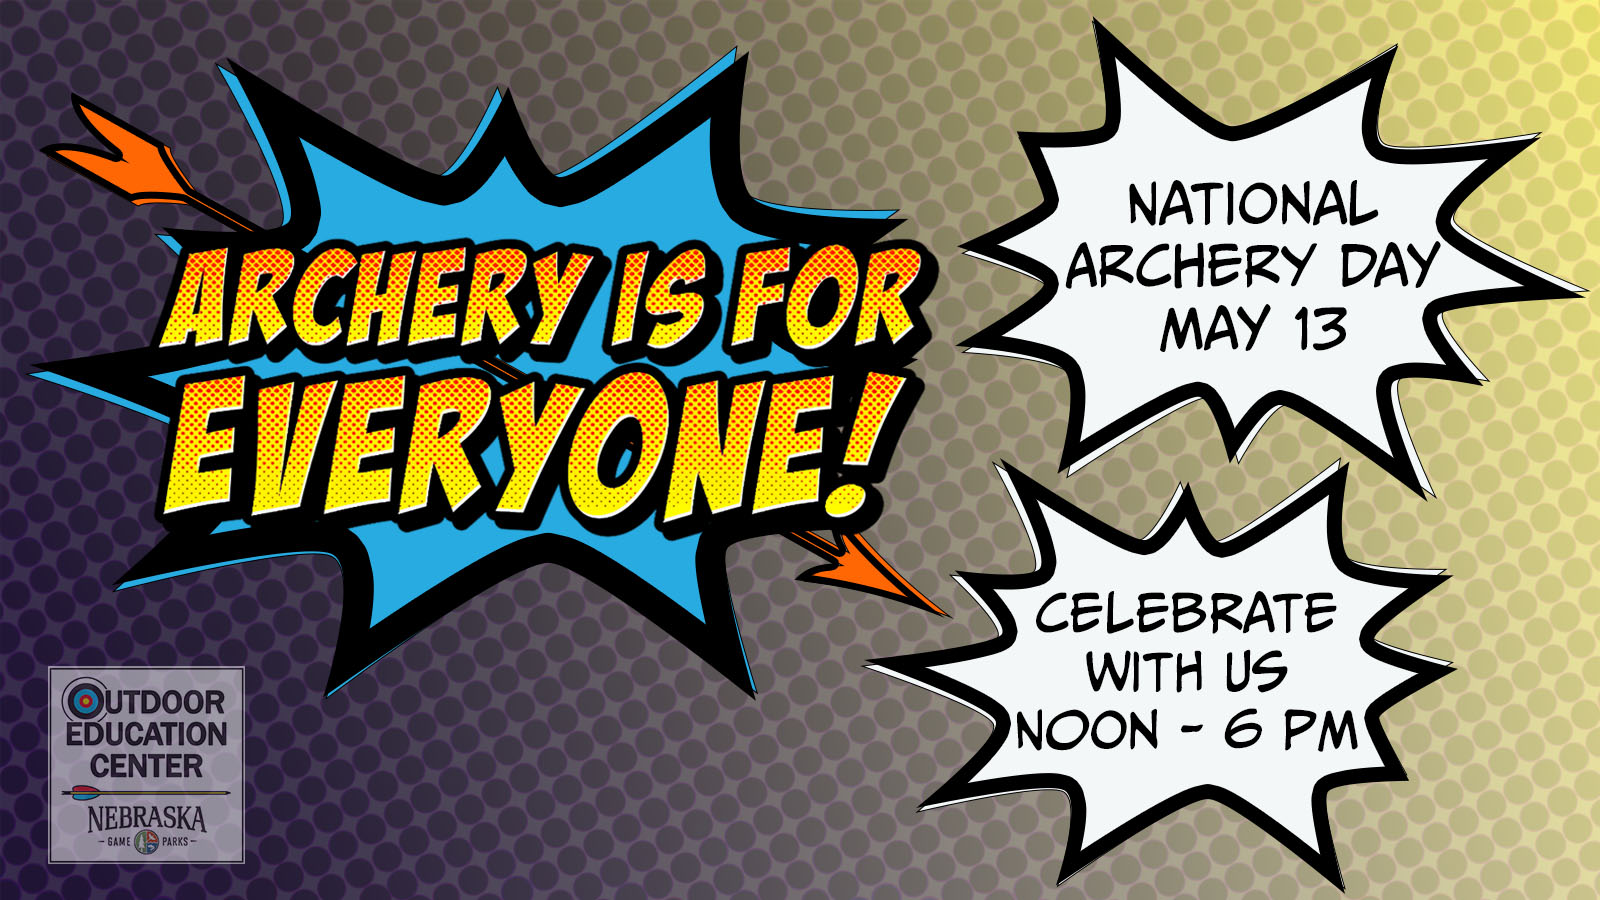 Comic Page Text Archery is for Everyone; National Archery Day May 13; Celebrate with us Noon - 6 pm